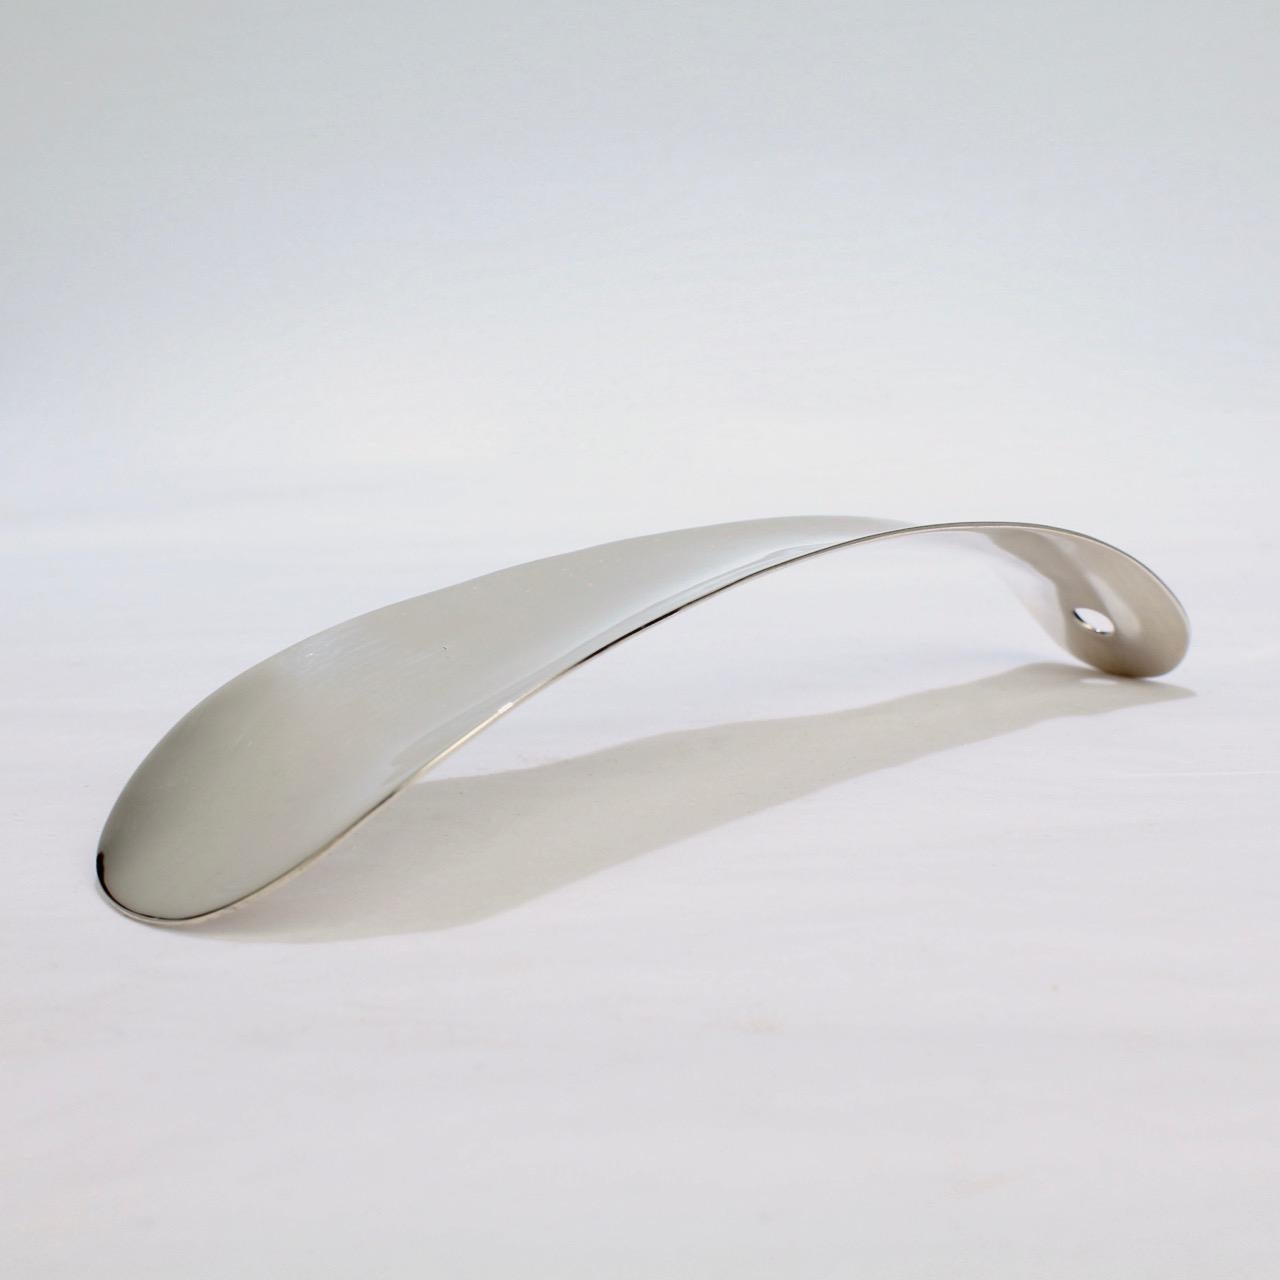 A sleek Art Deco sterling silver shoe horn.

Simple and streamlined, this thick-gauged shoe horn is a perfect example of 'Form meets Function'. 

Simply a sturdy accessory that is a pleasure to use!

The reverse is marked for the Roger Williams